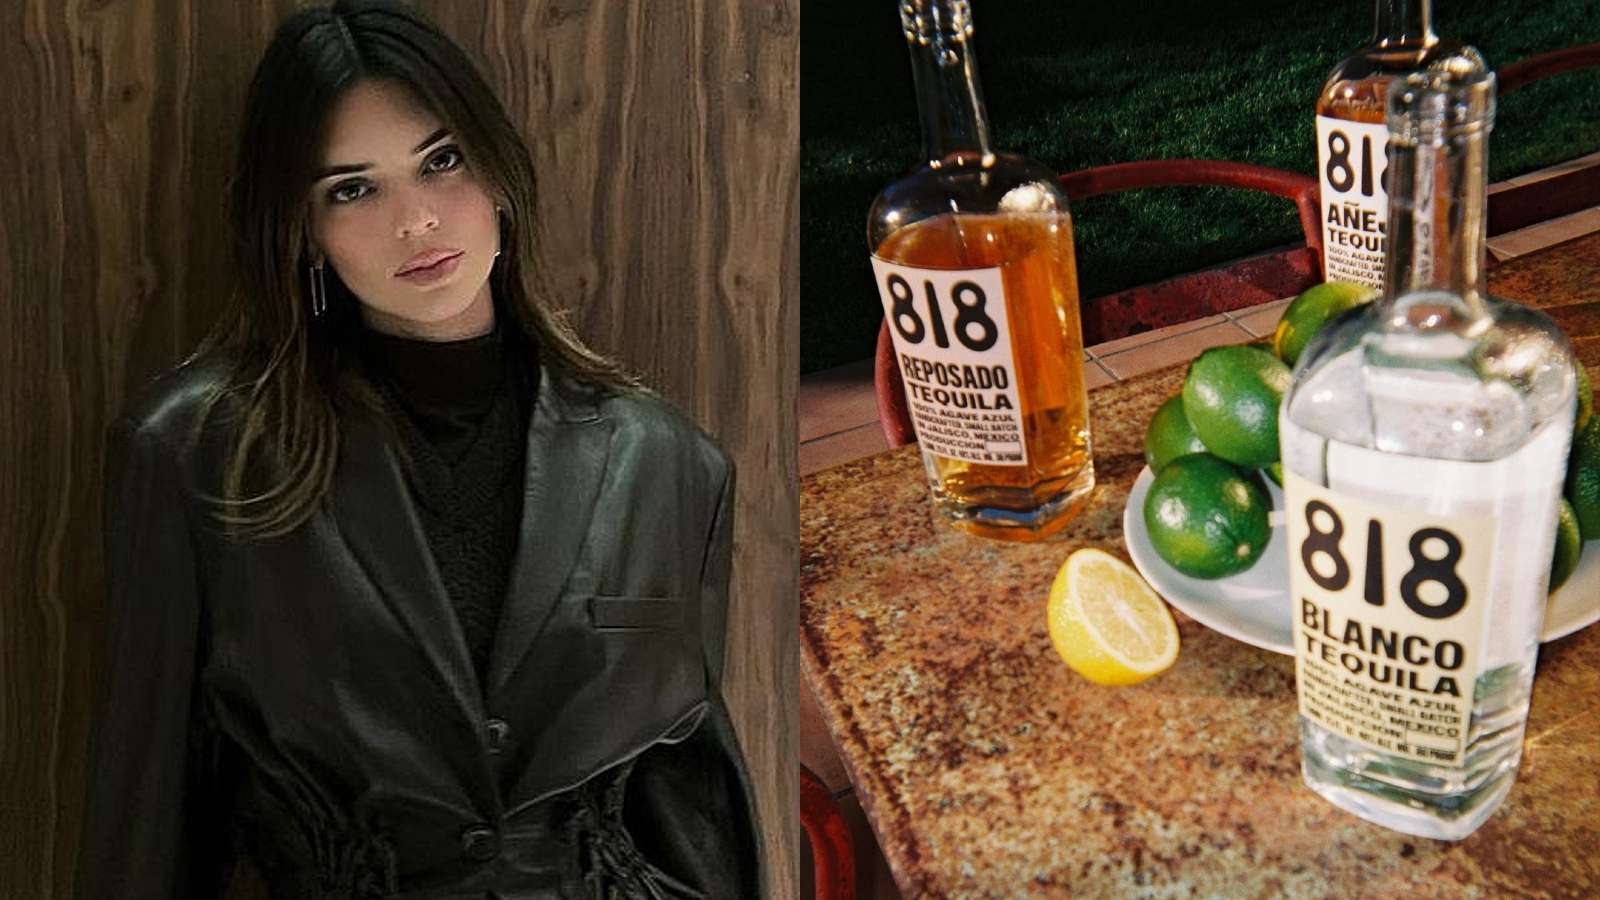 Kendall Jenners new tequila brand Drink 818